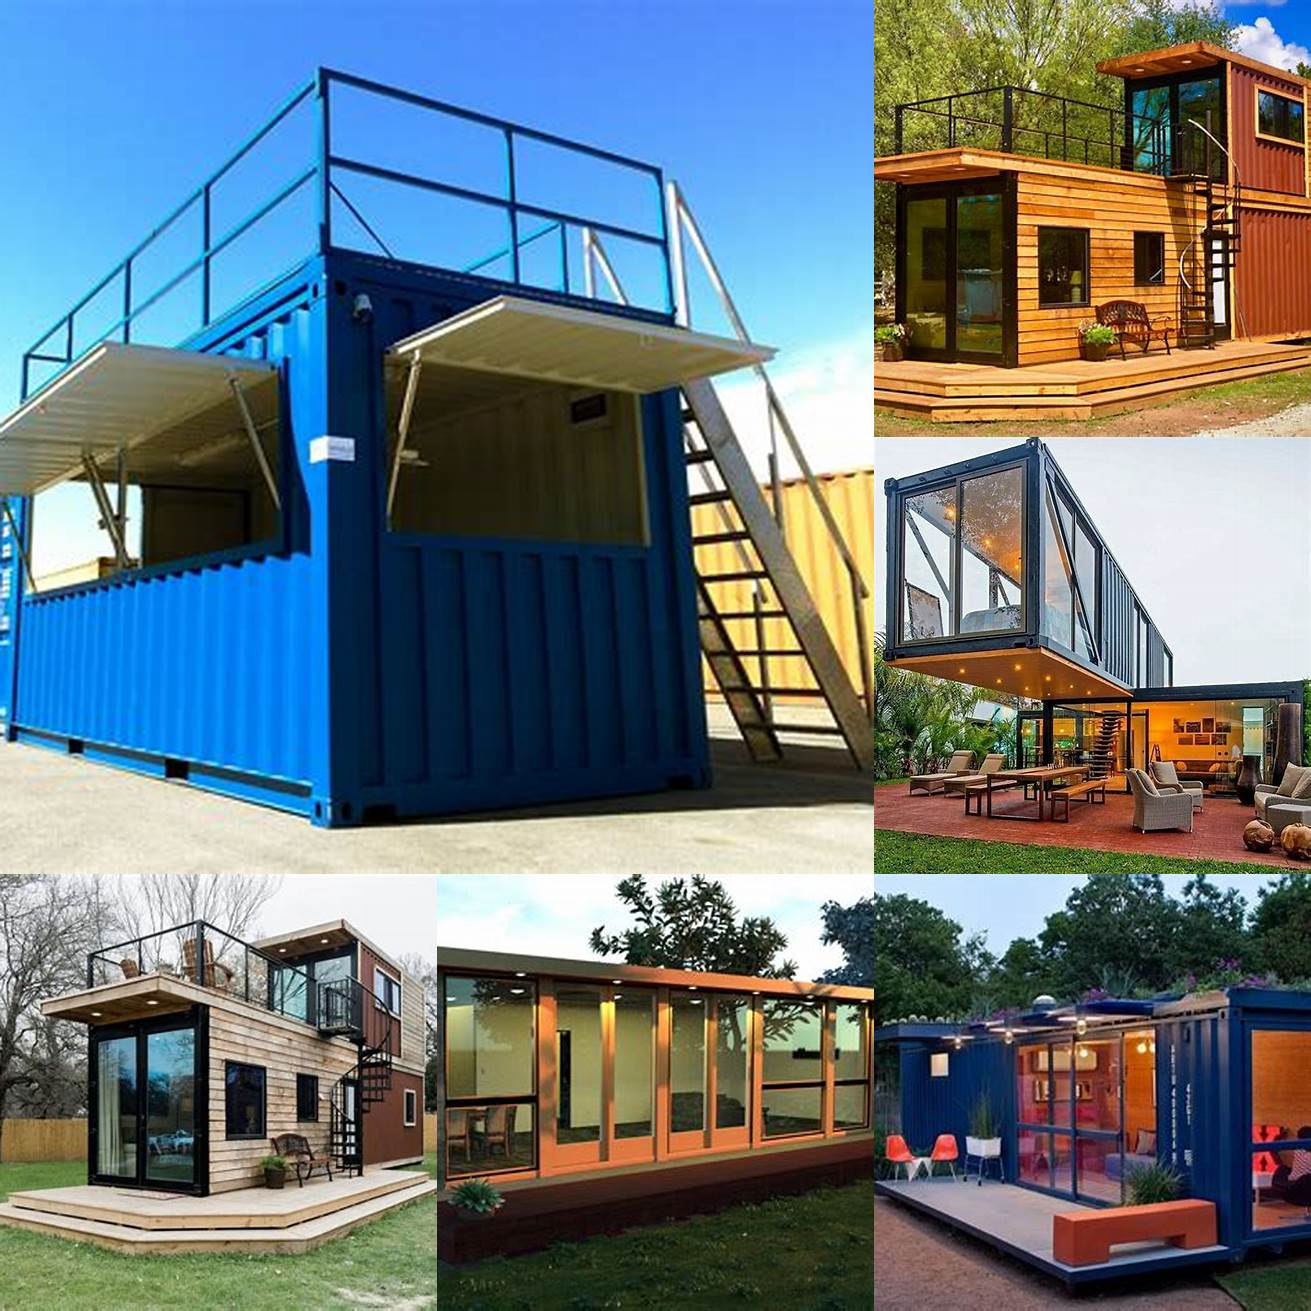 2 Weight Rooftop containers can be heavy so make sure to choose one that is appropriate for your buildings weight capacity